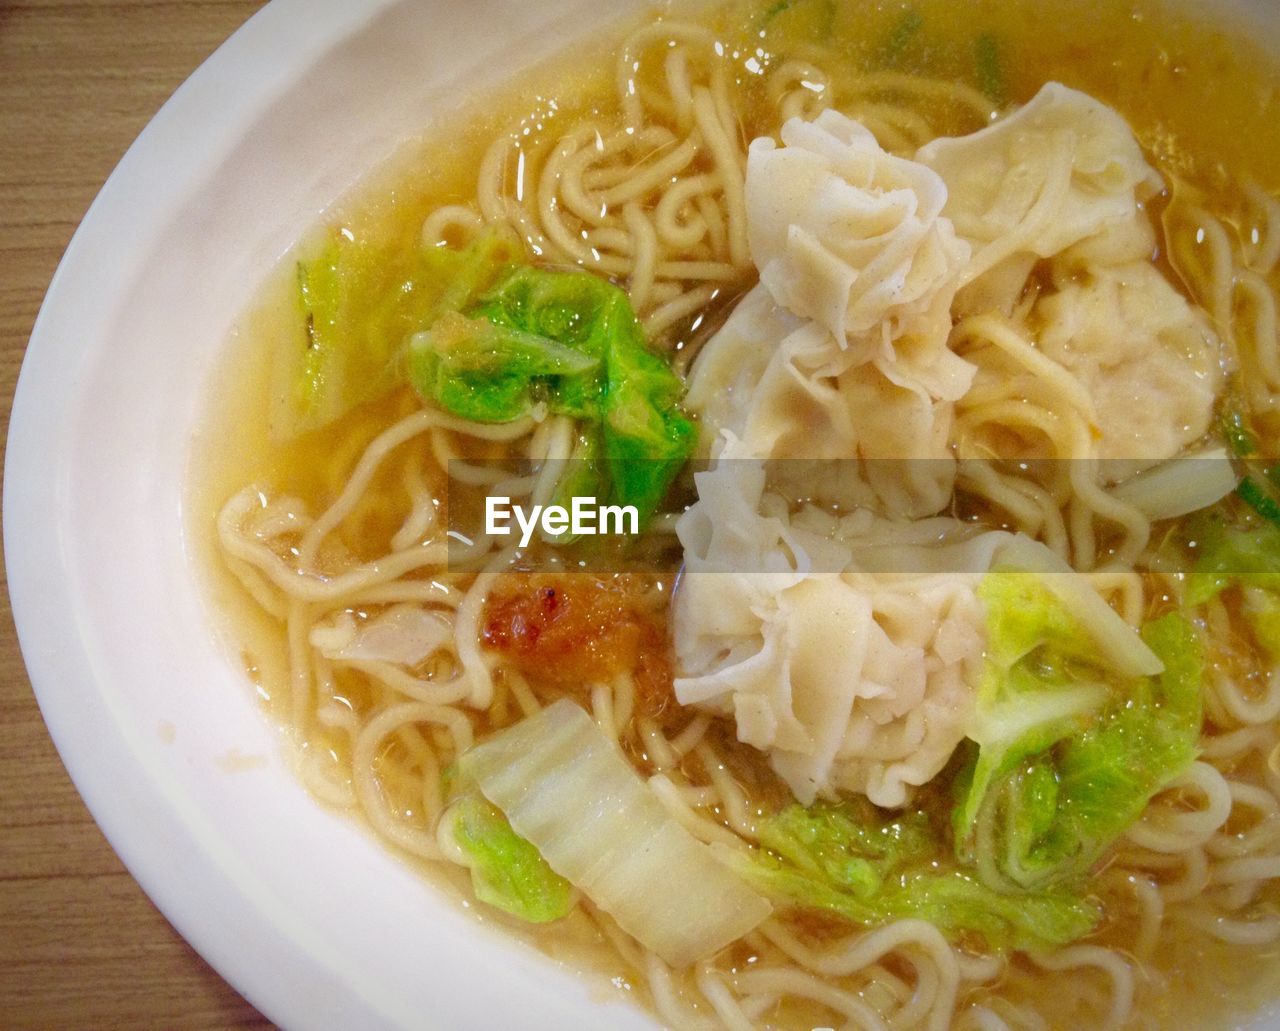 CLOSE-UP OF SOUP SERVED WITH NOODLES